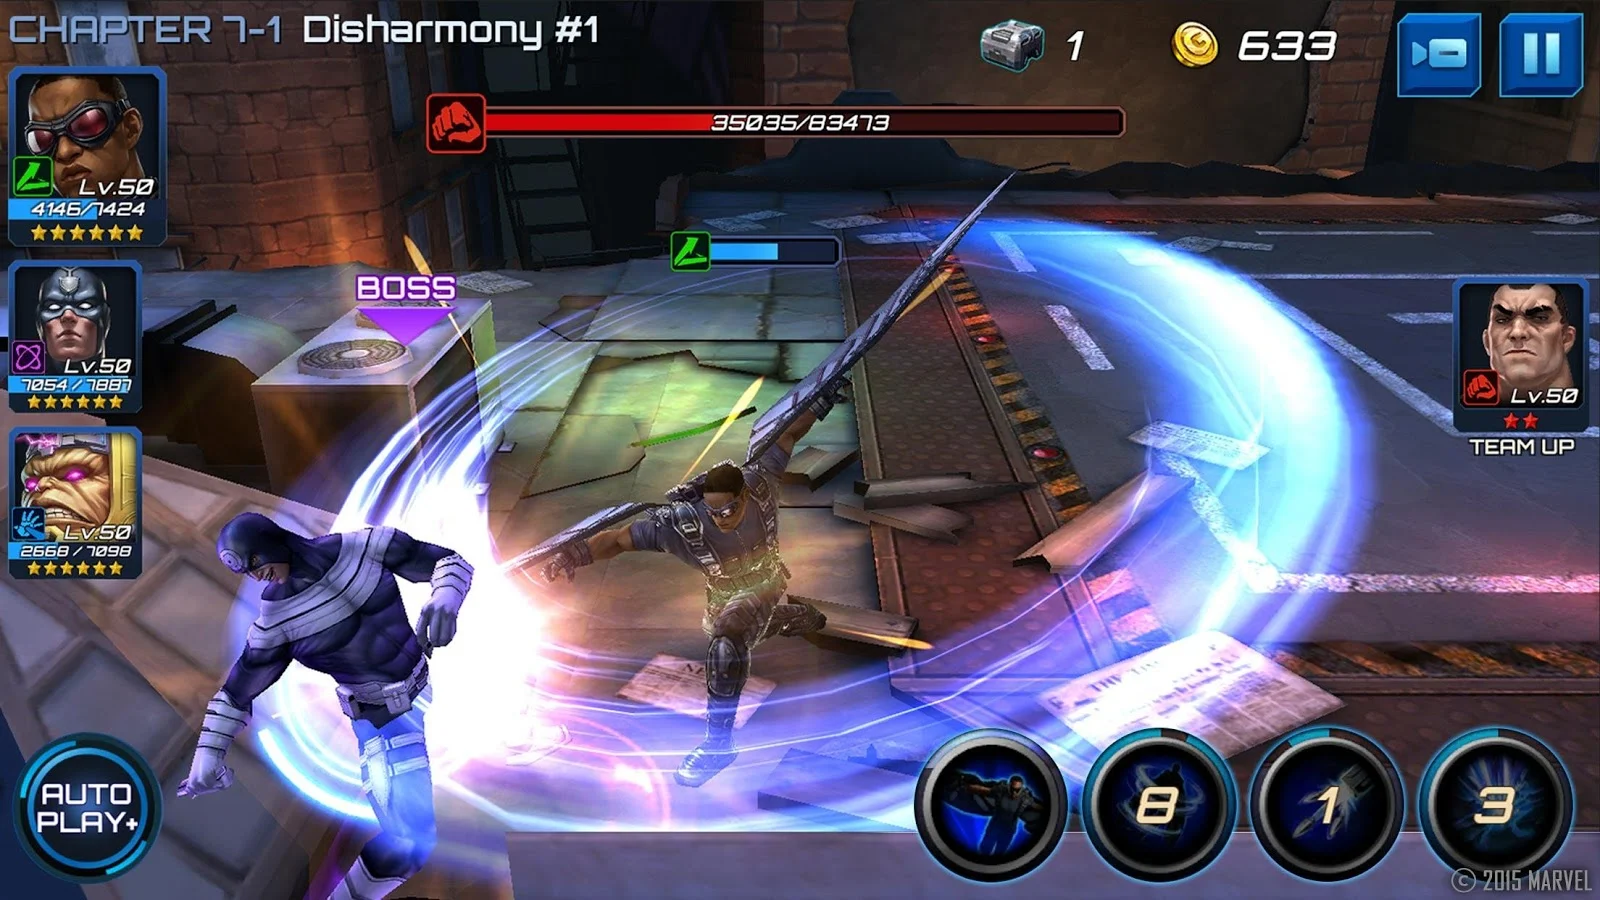 &#91;Android / iOS&#93; Marvel Future Fight - RPG of Marvel Universe